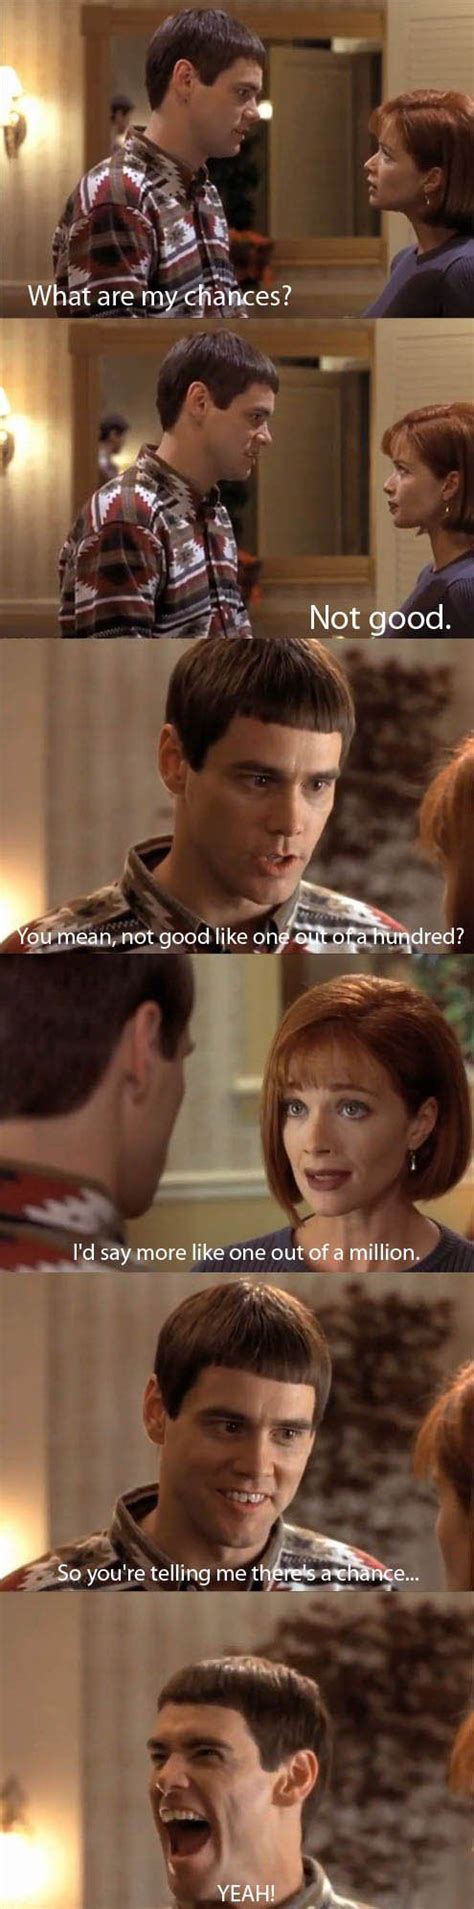 One of my favorite scenes from dumb & dumber (1994). 39 best images about Dumb and Dumber :^P on Pinterest | Jim carey, Limo and Quotes